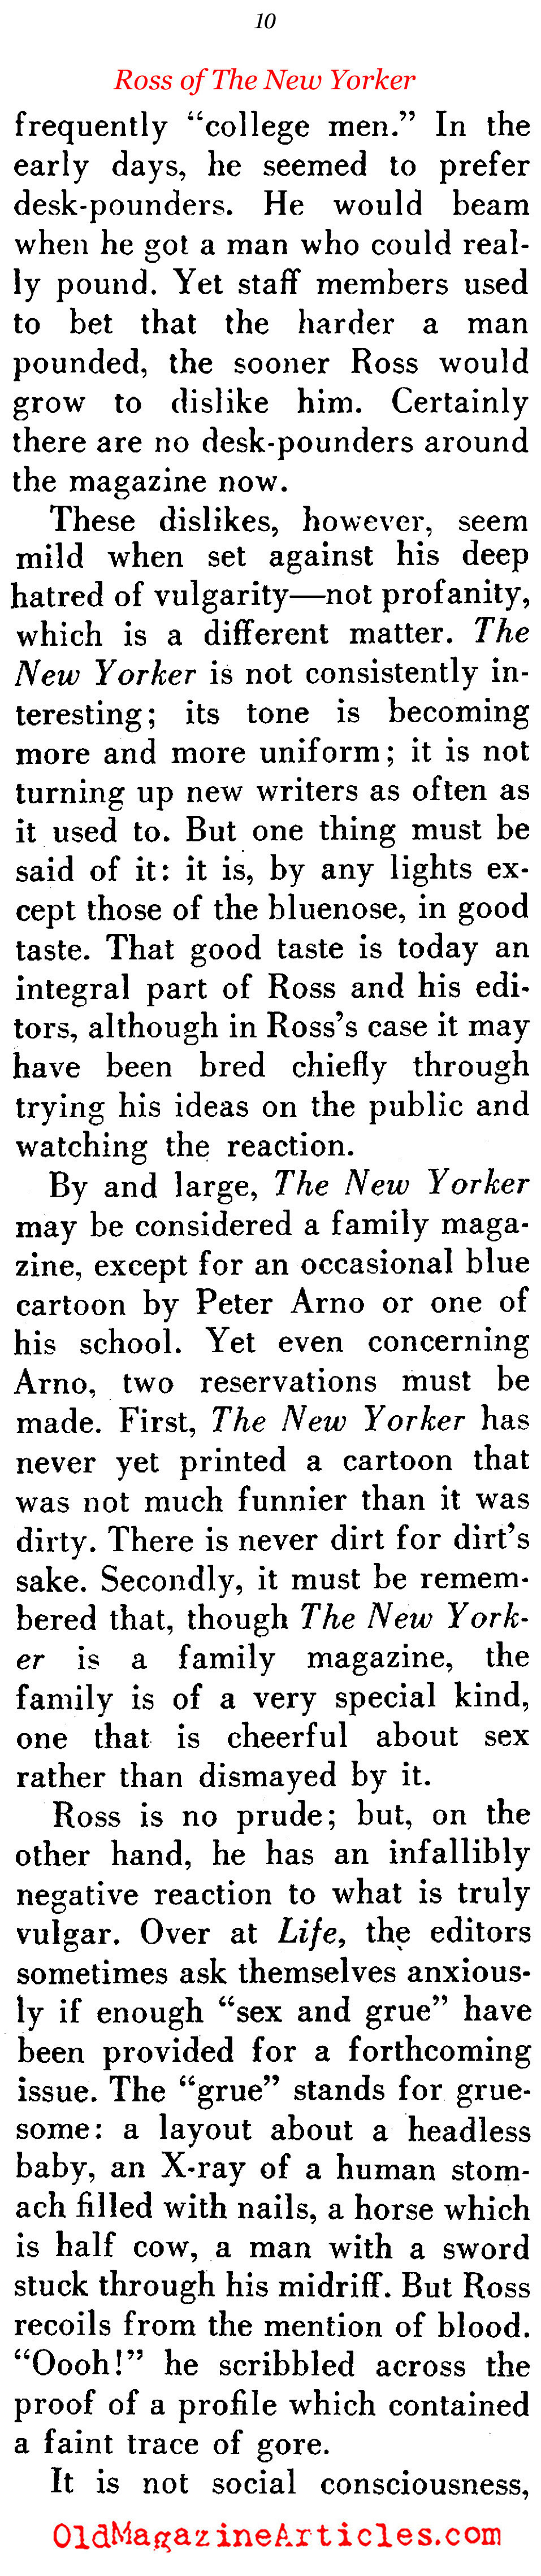 Ross of The New Yorker: Part II ('48 Magazine, 1948)